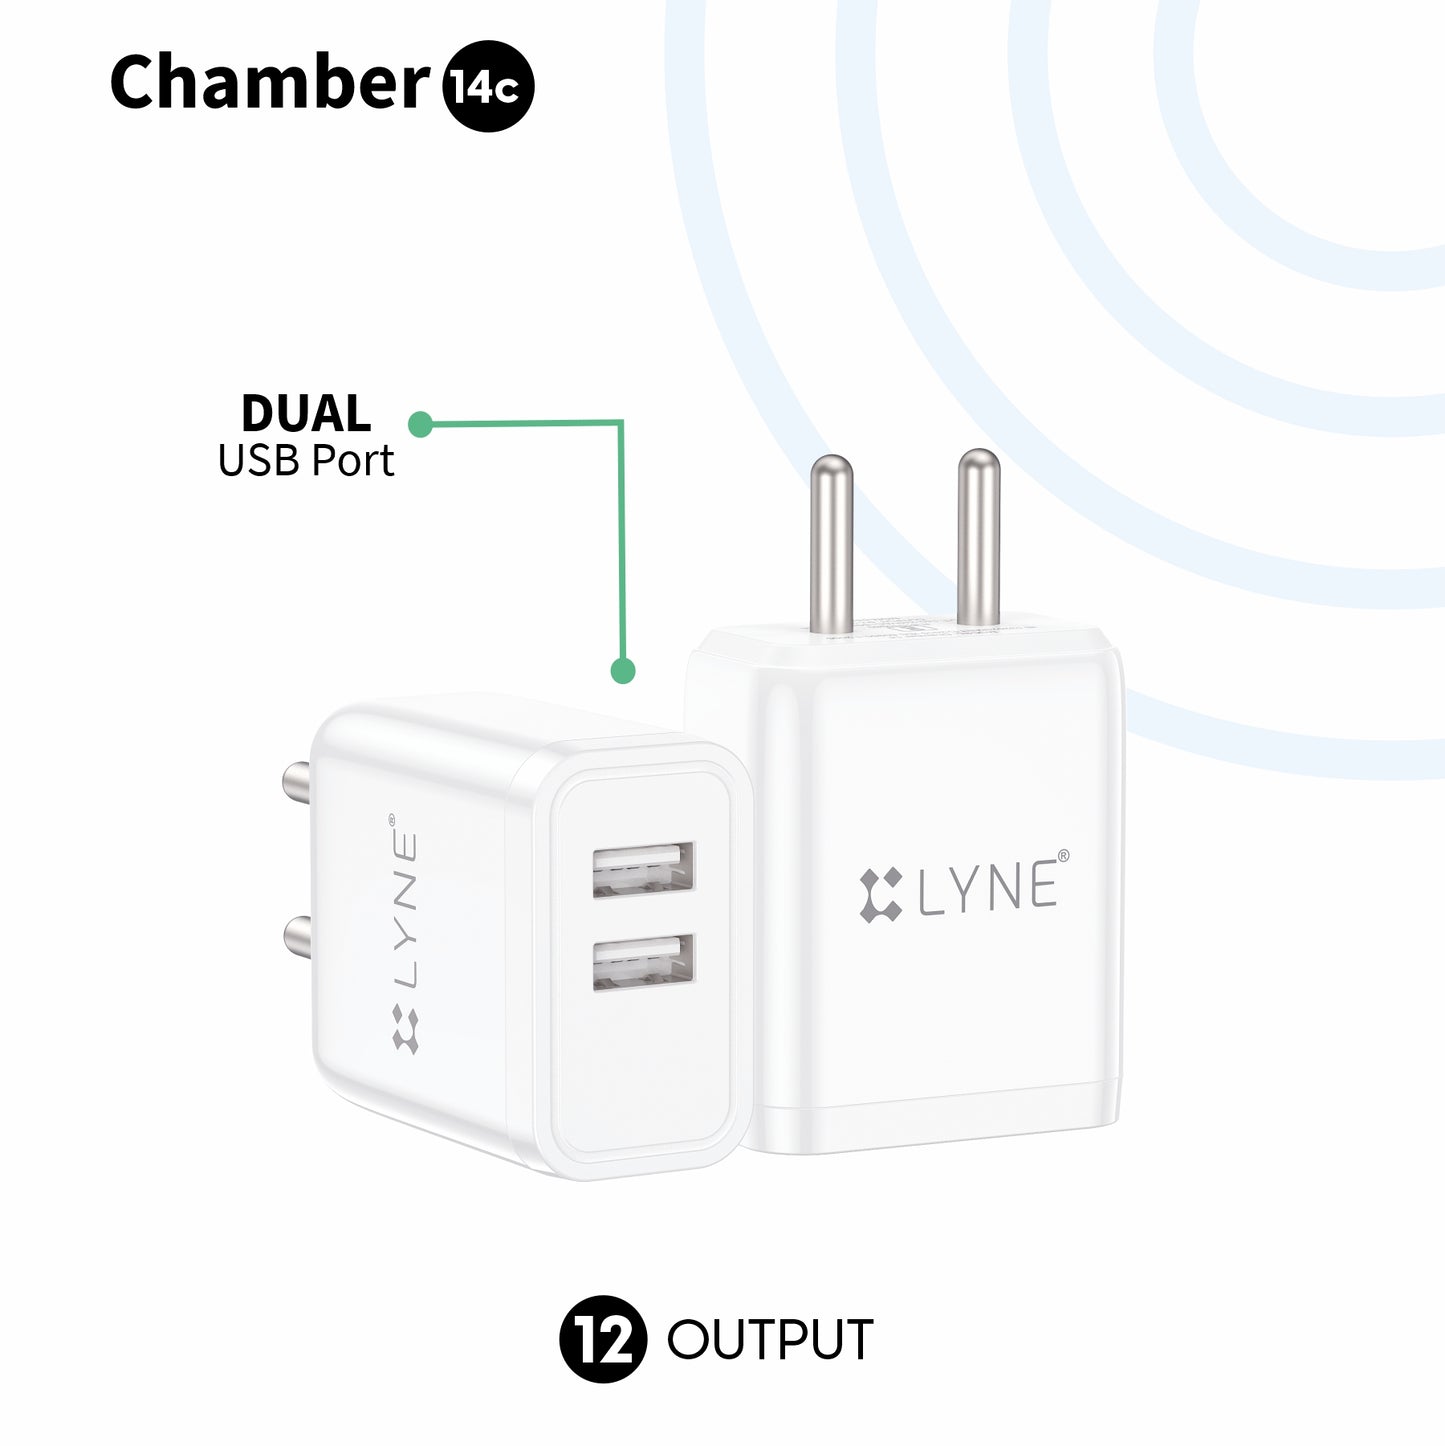 LYNE Chamber 14c  12W Output With Type-C Cable, Dual USB Port